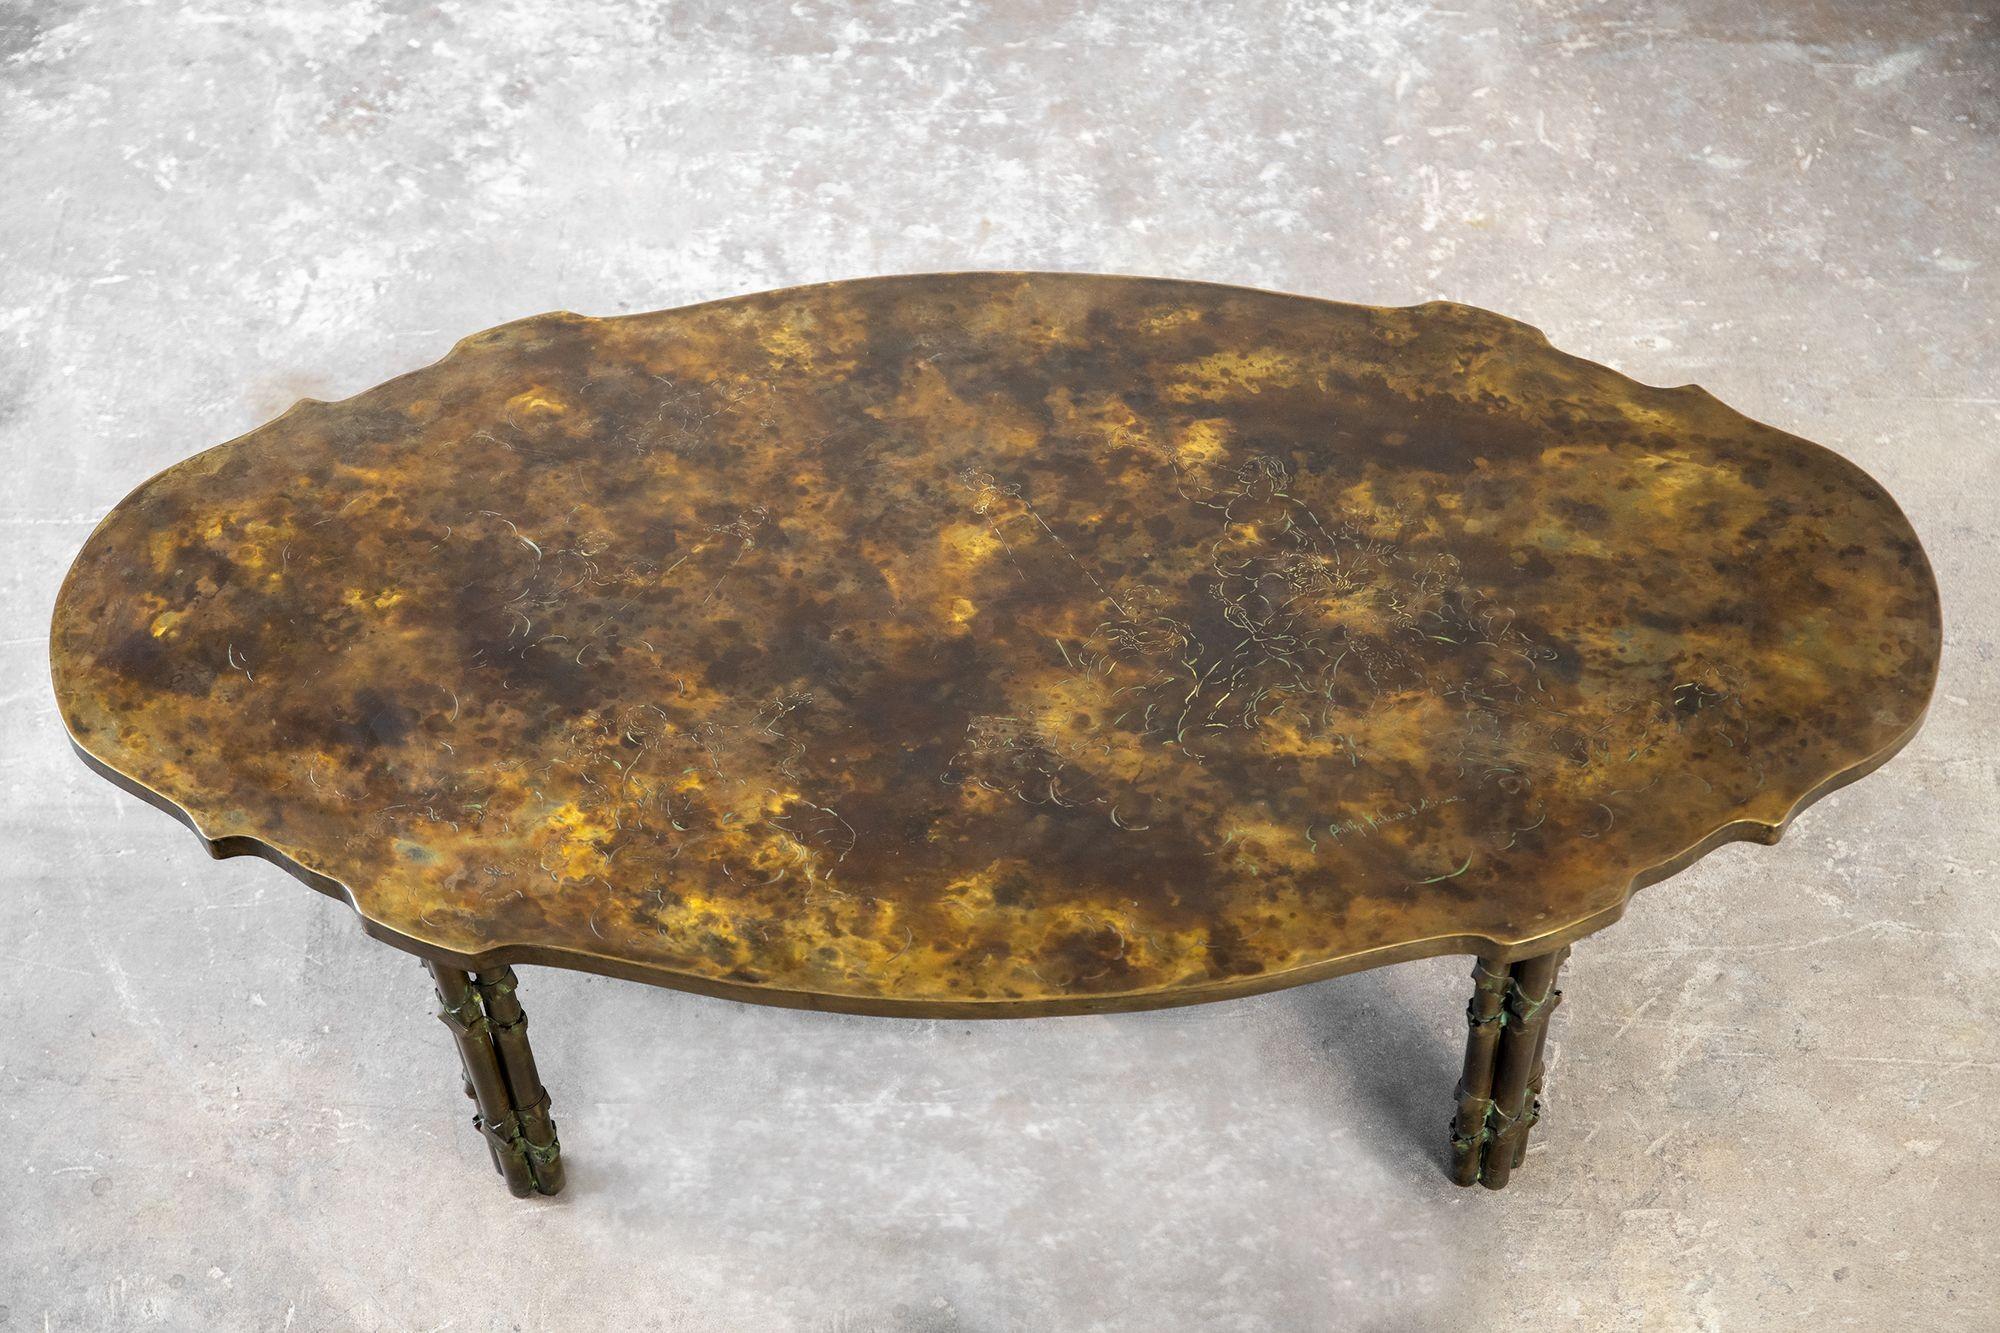 This Boucher cocktail table was designed by Philip and Kelvin Laverne in the 1960s. According to the catalog it is comprised of three separate bronzes inlaid by hand to create one solid bronze background of magnificent light and dark golden brown